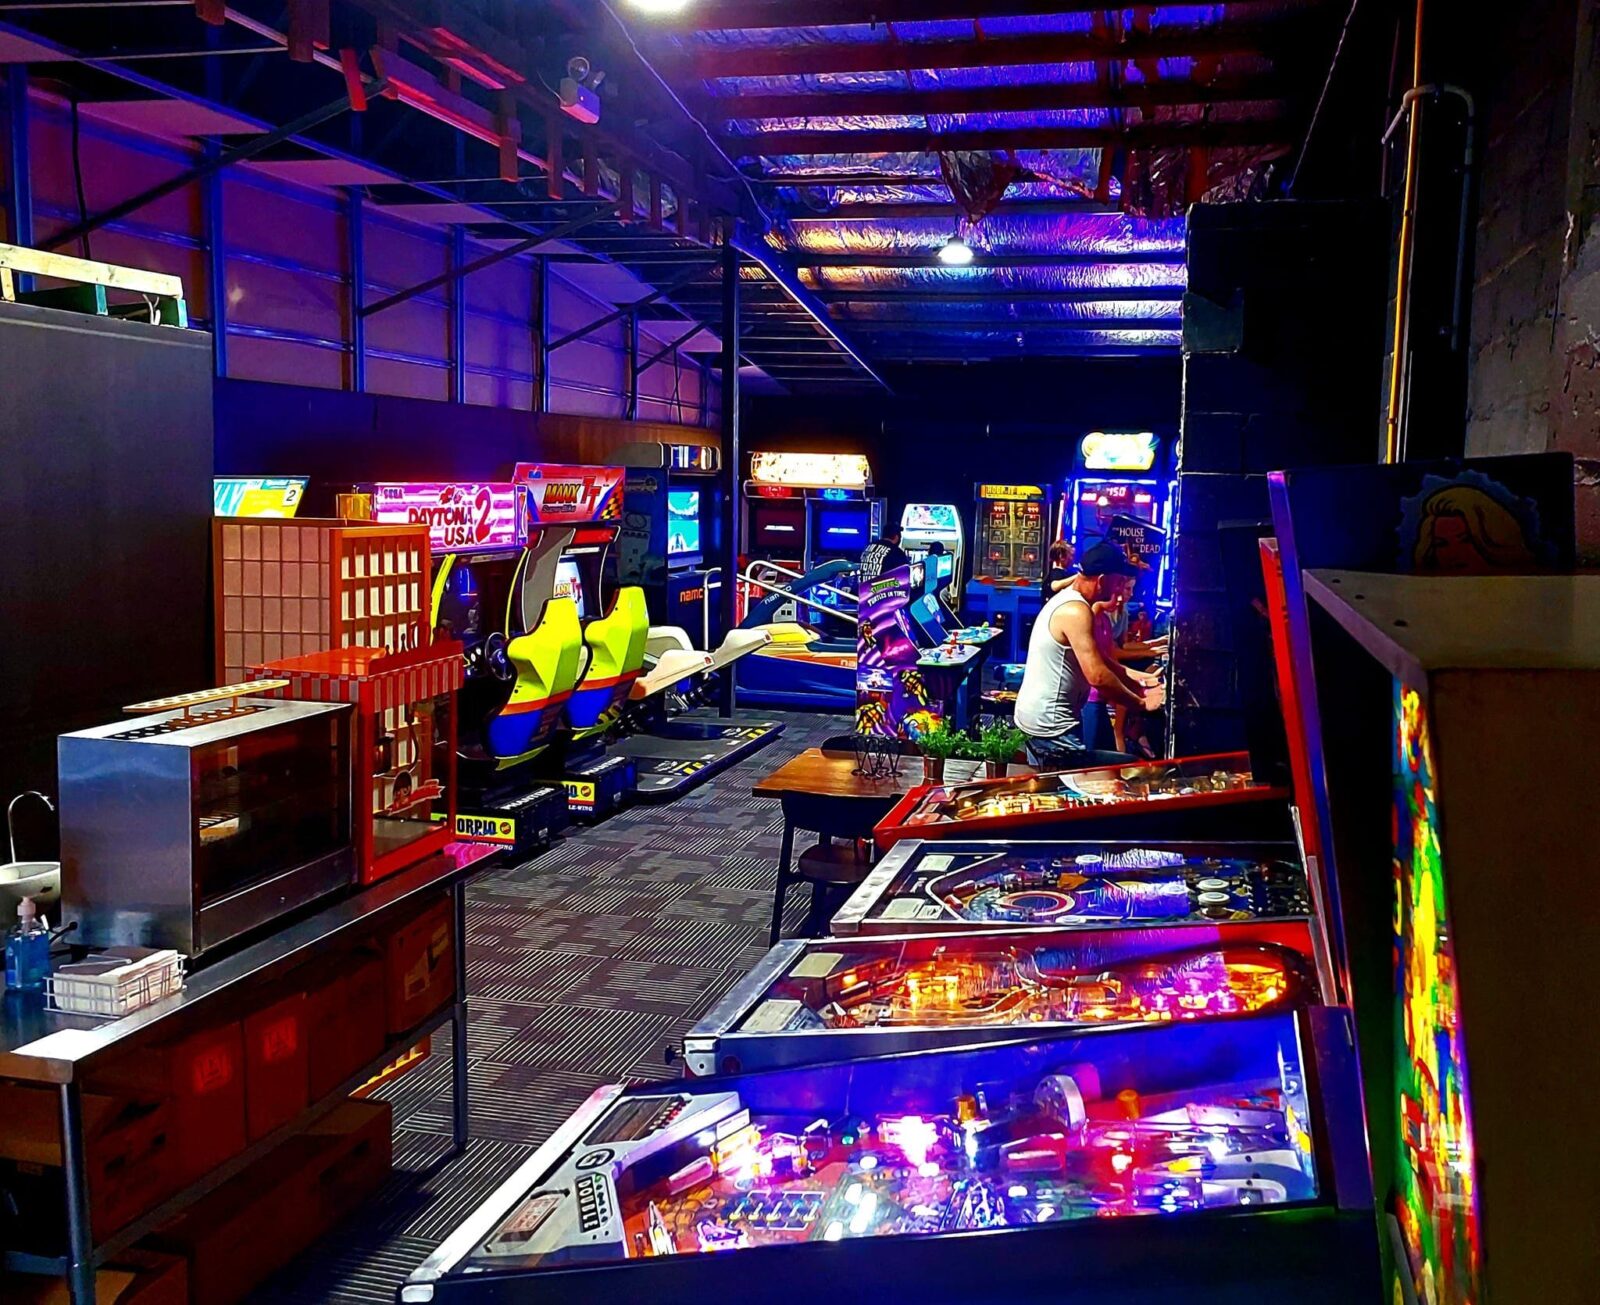 Picture showing a peek through the arcade venue. You can see pinball machines, racers, snack bar